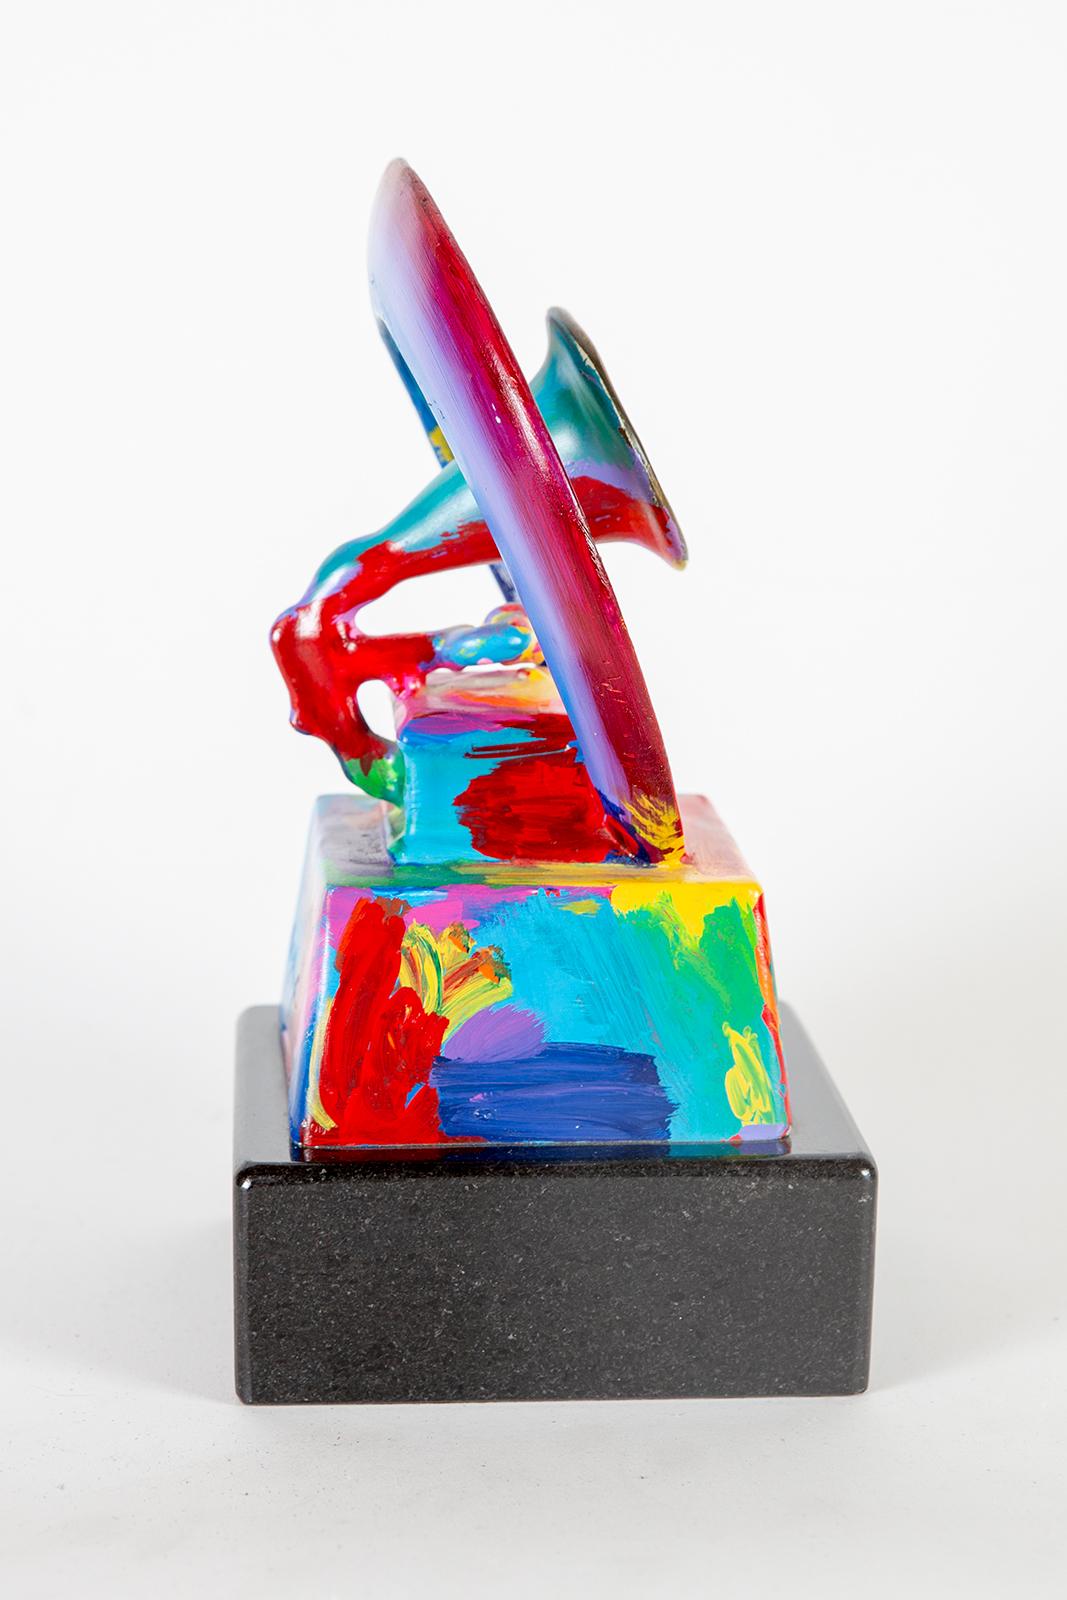 Artist: Peter Max
Title: Grammy
Medium: Hand Painted Acrylic over Bronze
Size: 12